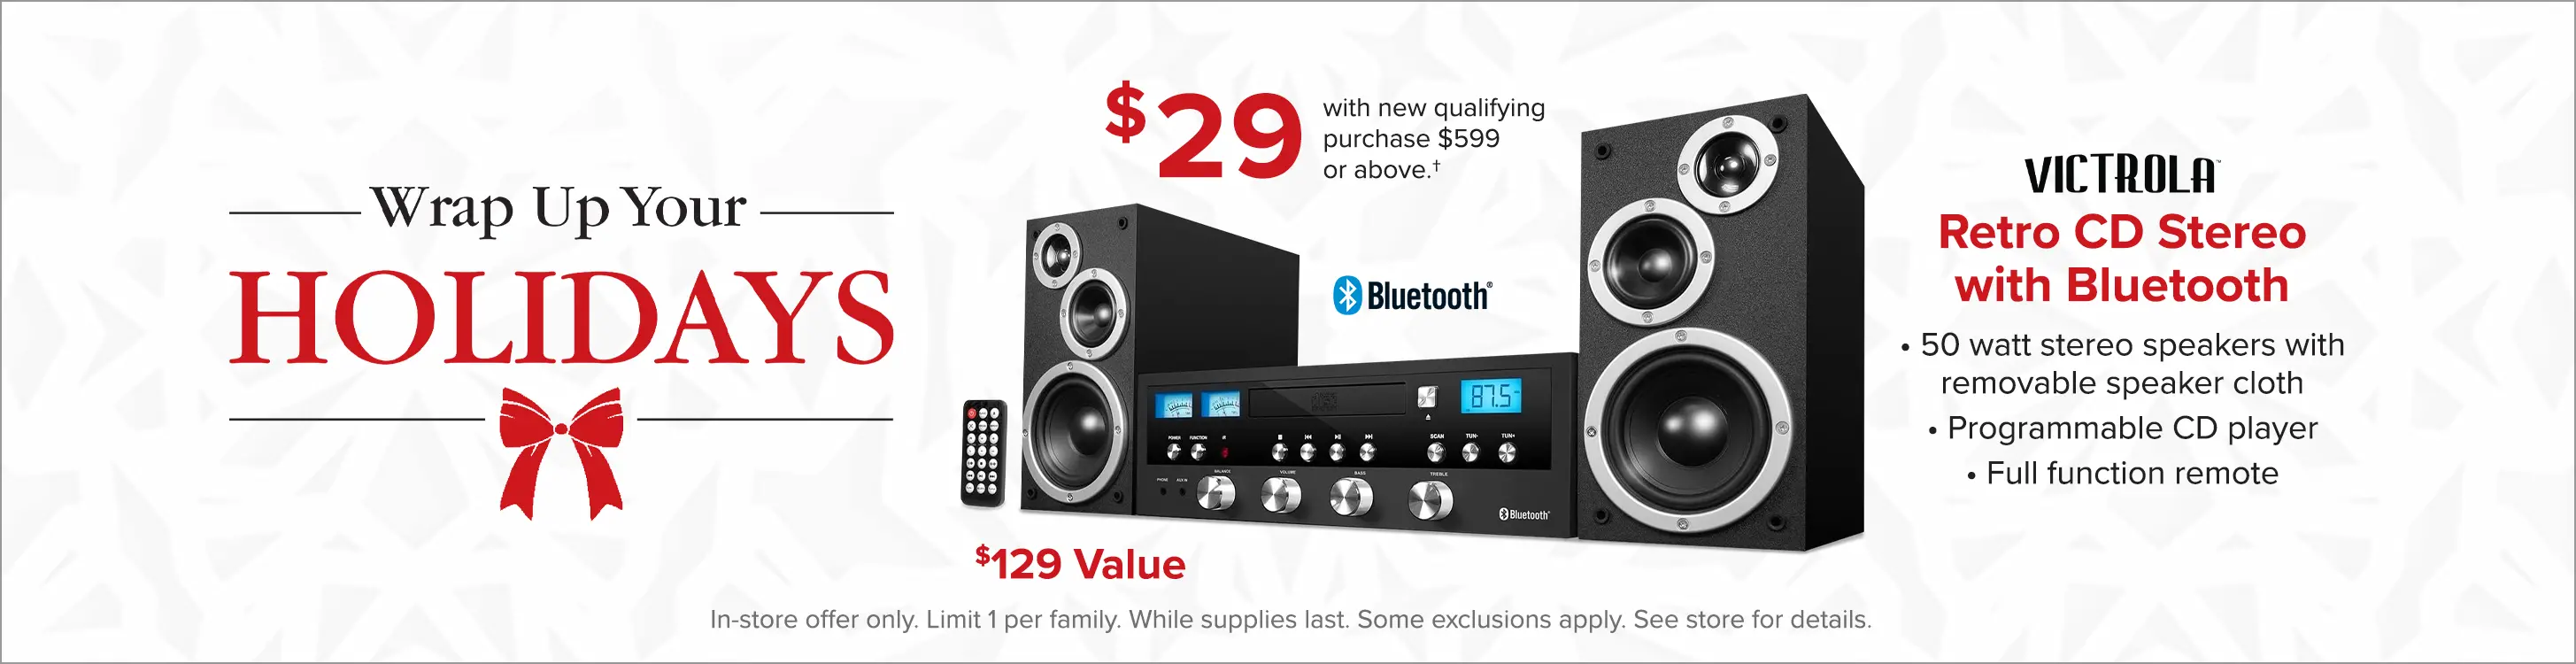 Get a Retro CD Stereo with Bluetooth for $29 with a new qualifying purchase of $599 or above. In Store Only!